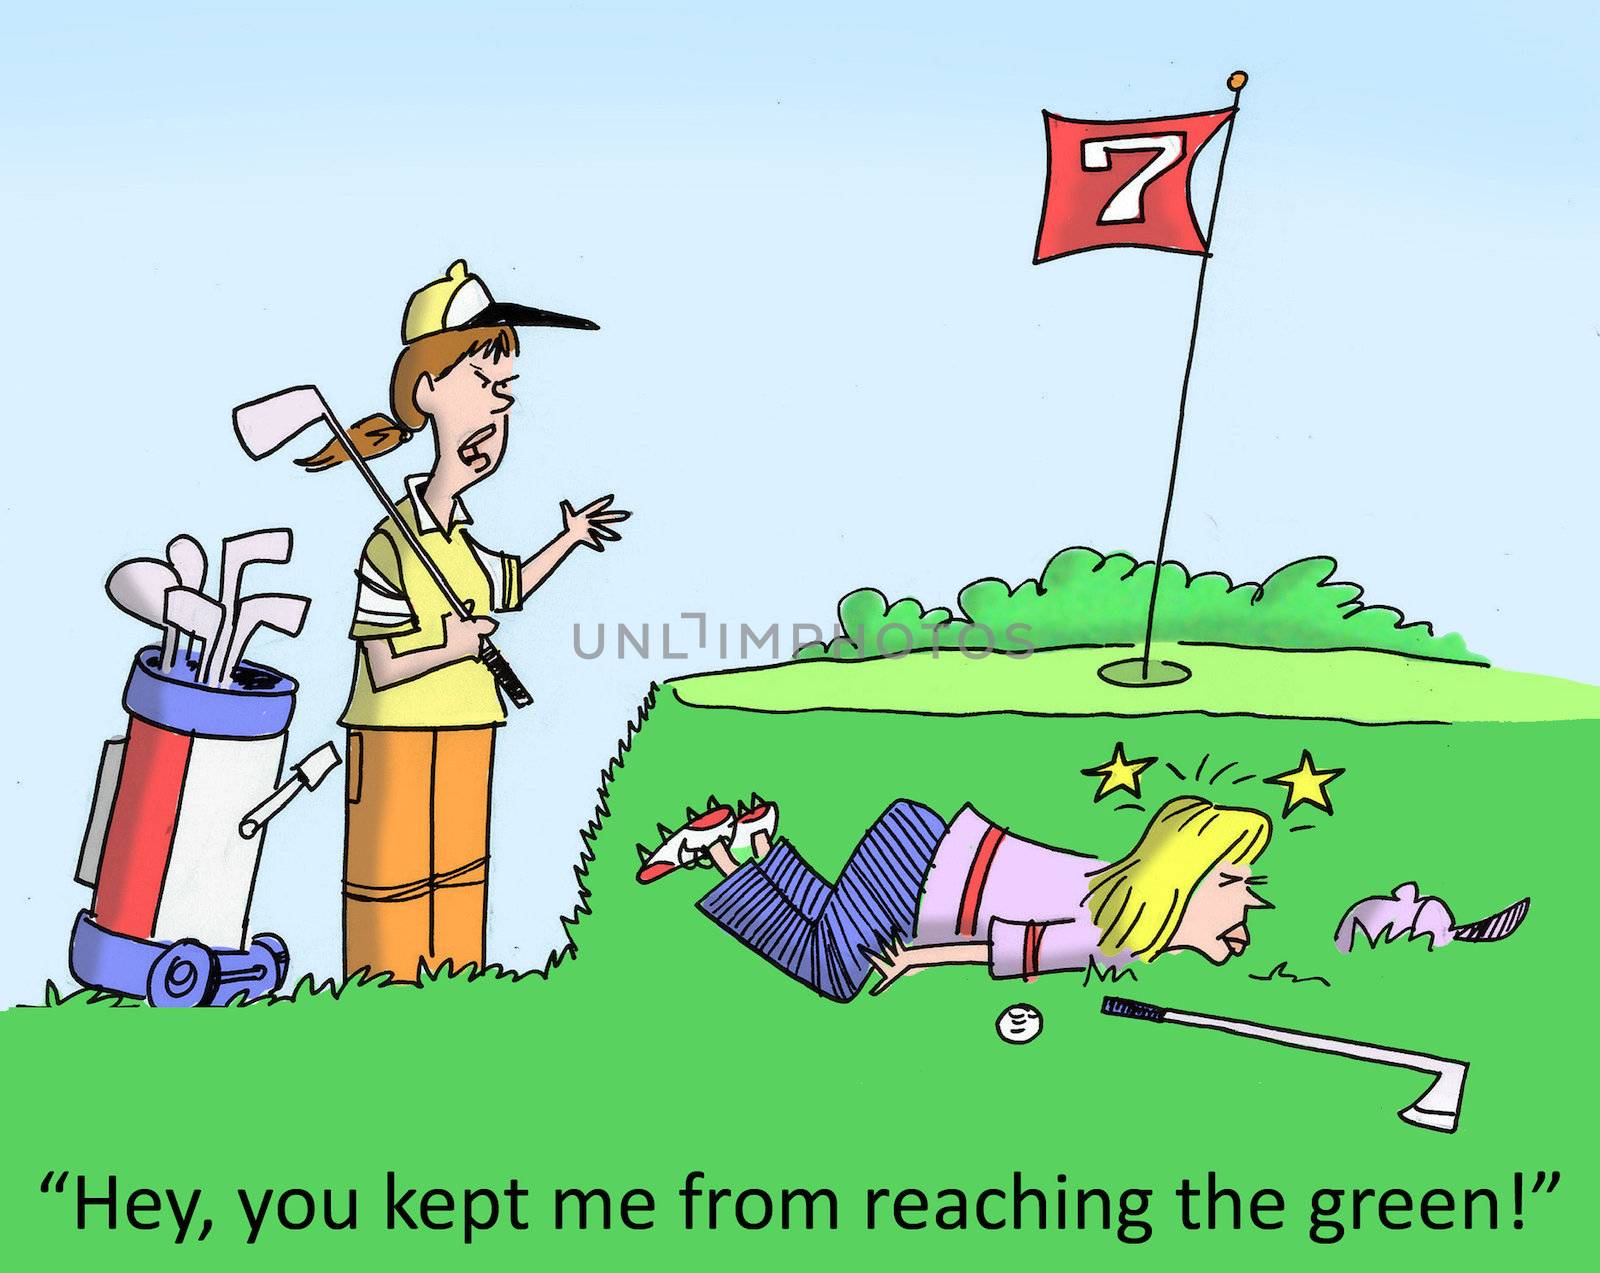 "Hey, you kept me from reaching the green."